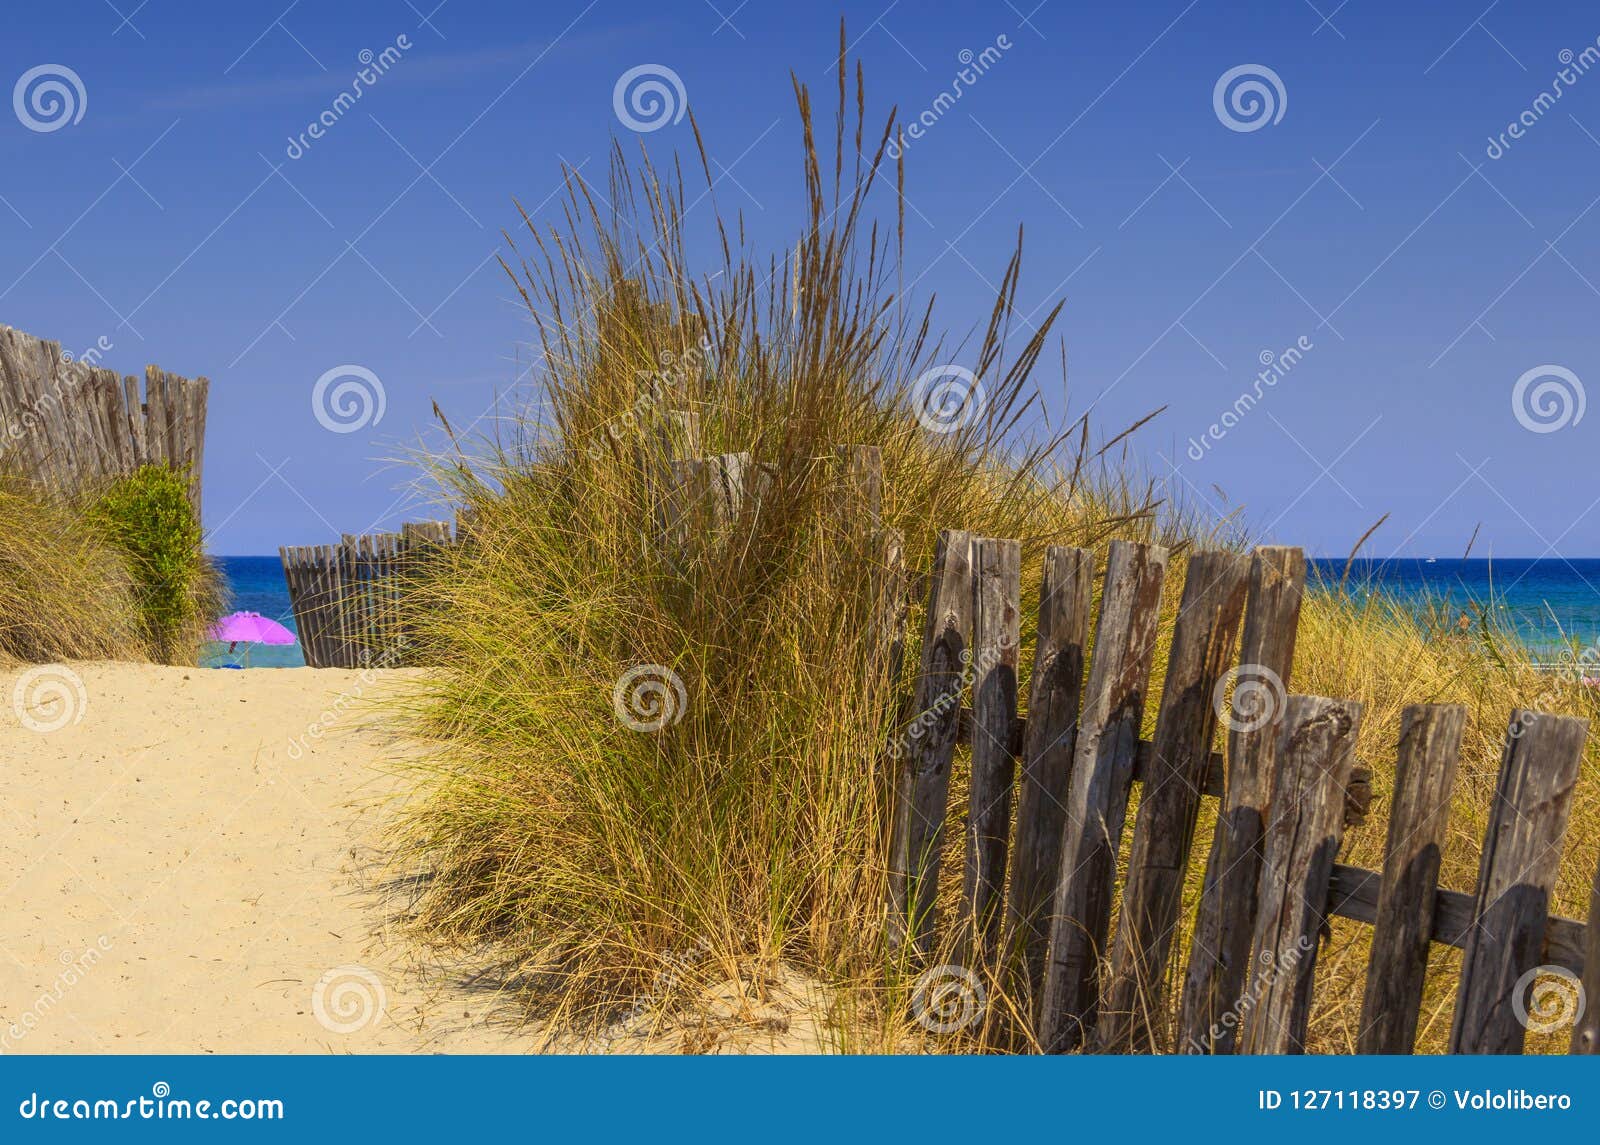 the regional natural park dune costiere torre canne: fence between sea dunes. brindisi apulia-italy-